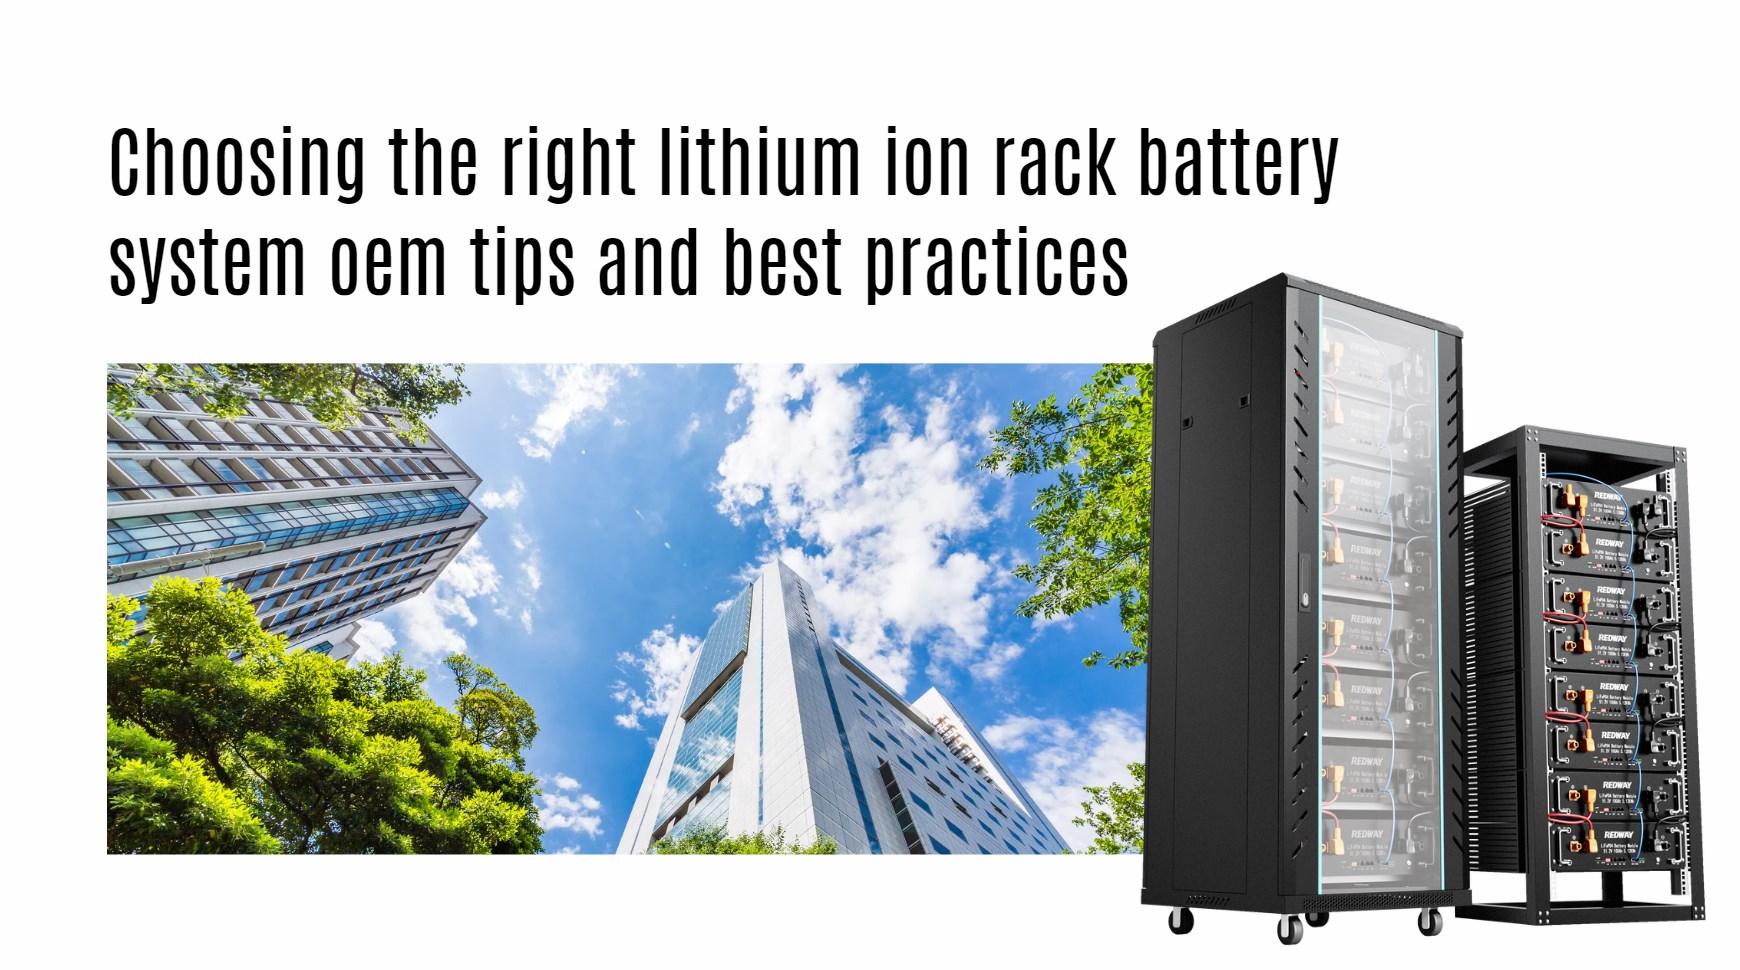 Choosing the right lithium ion rack battery system oem tips and best practices. server rack battery factory manufacturer oem 48v 100ah